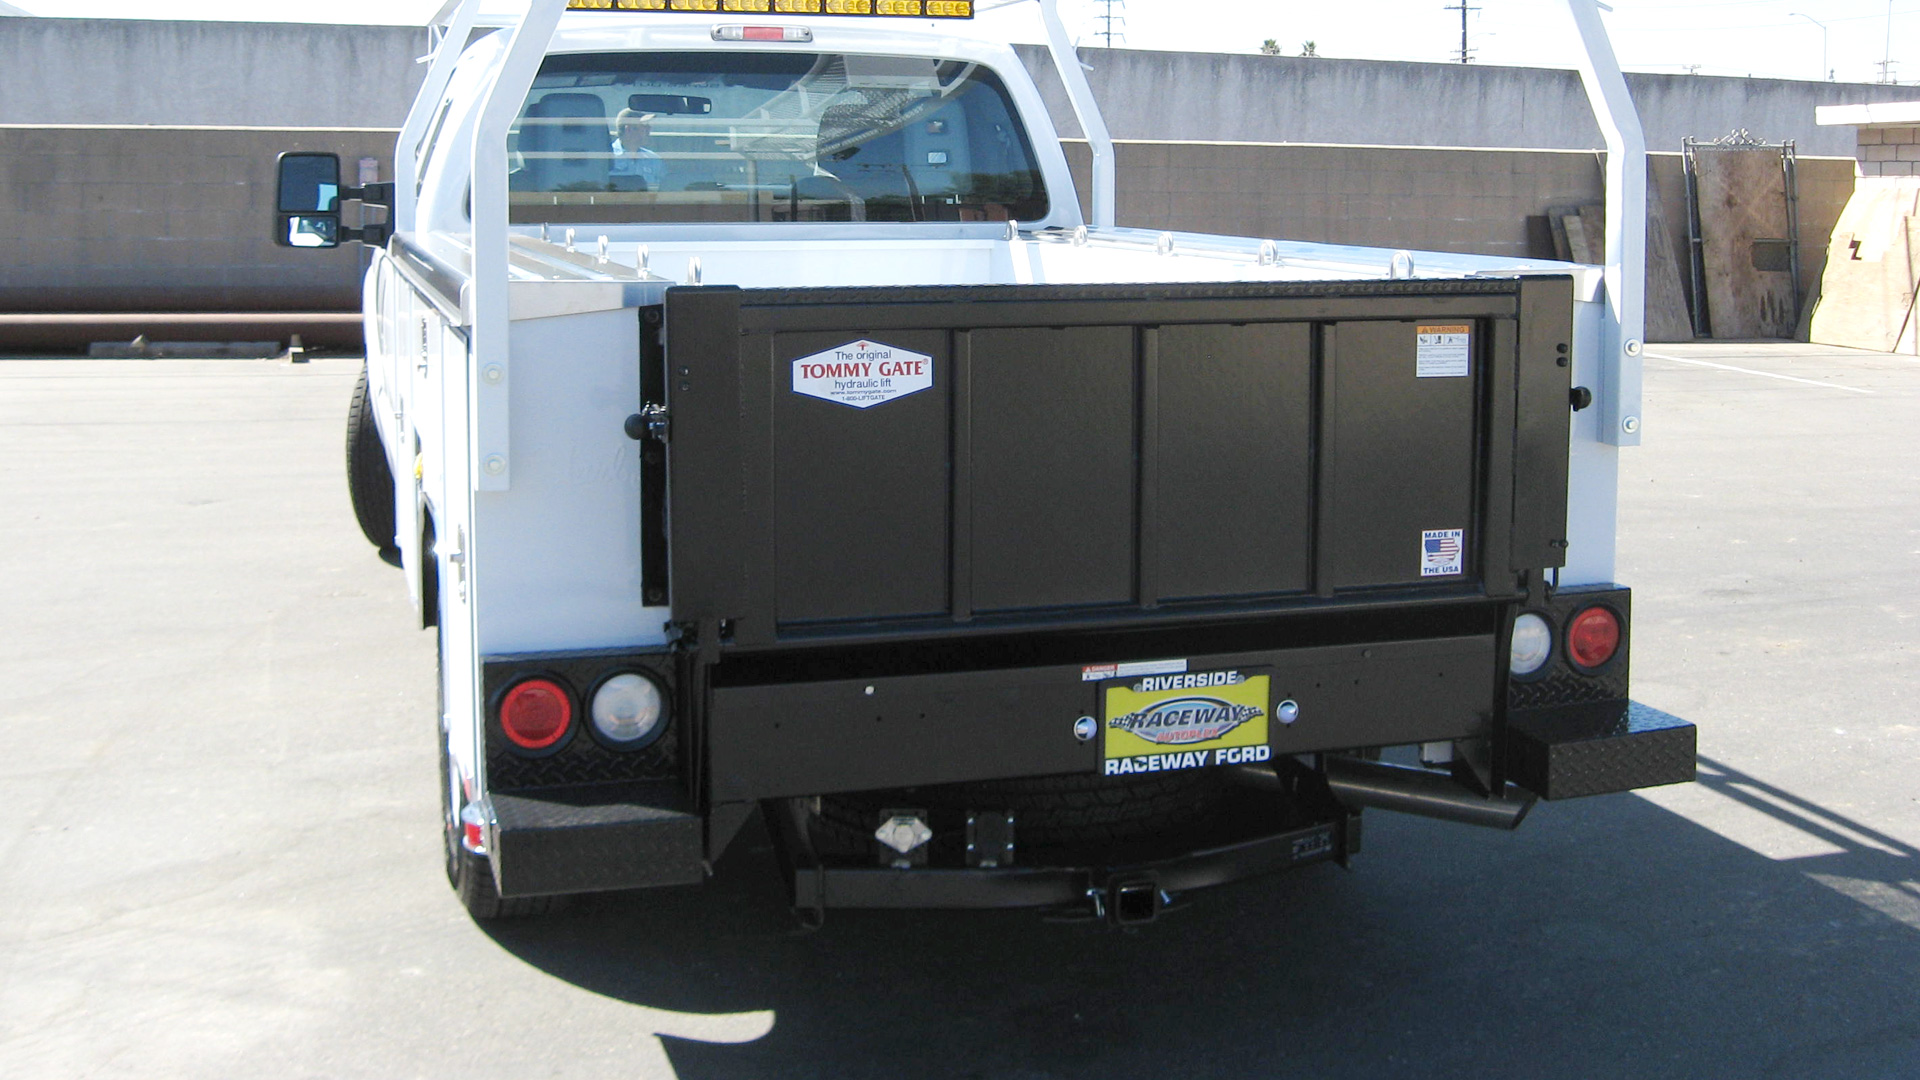 Tommy Gate Liftgate Photo Gallery